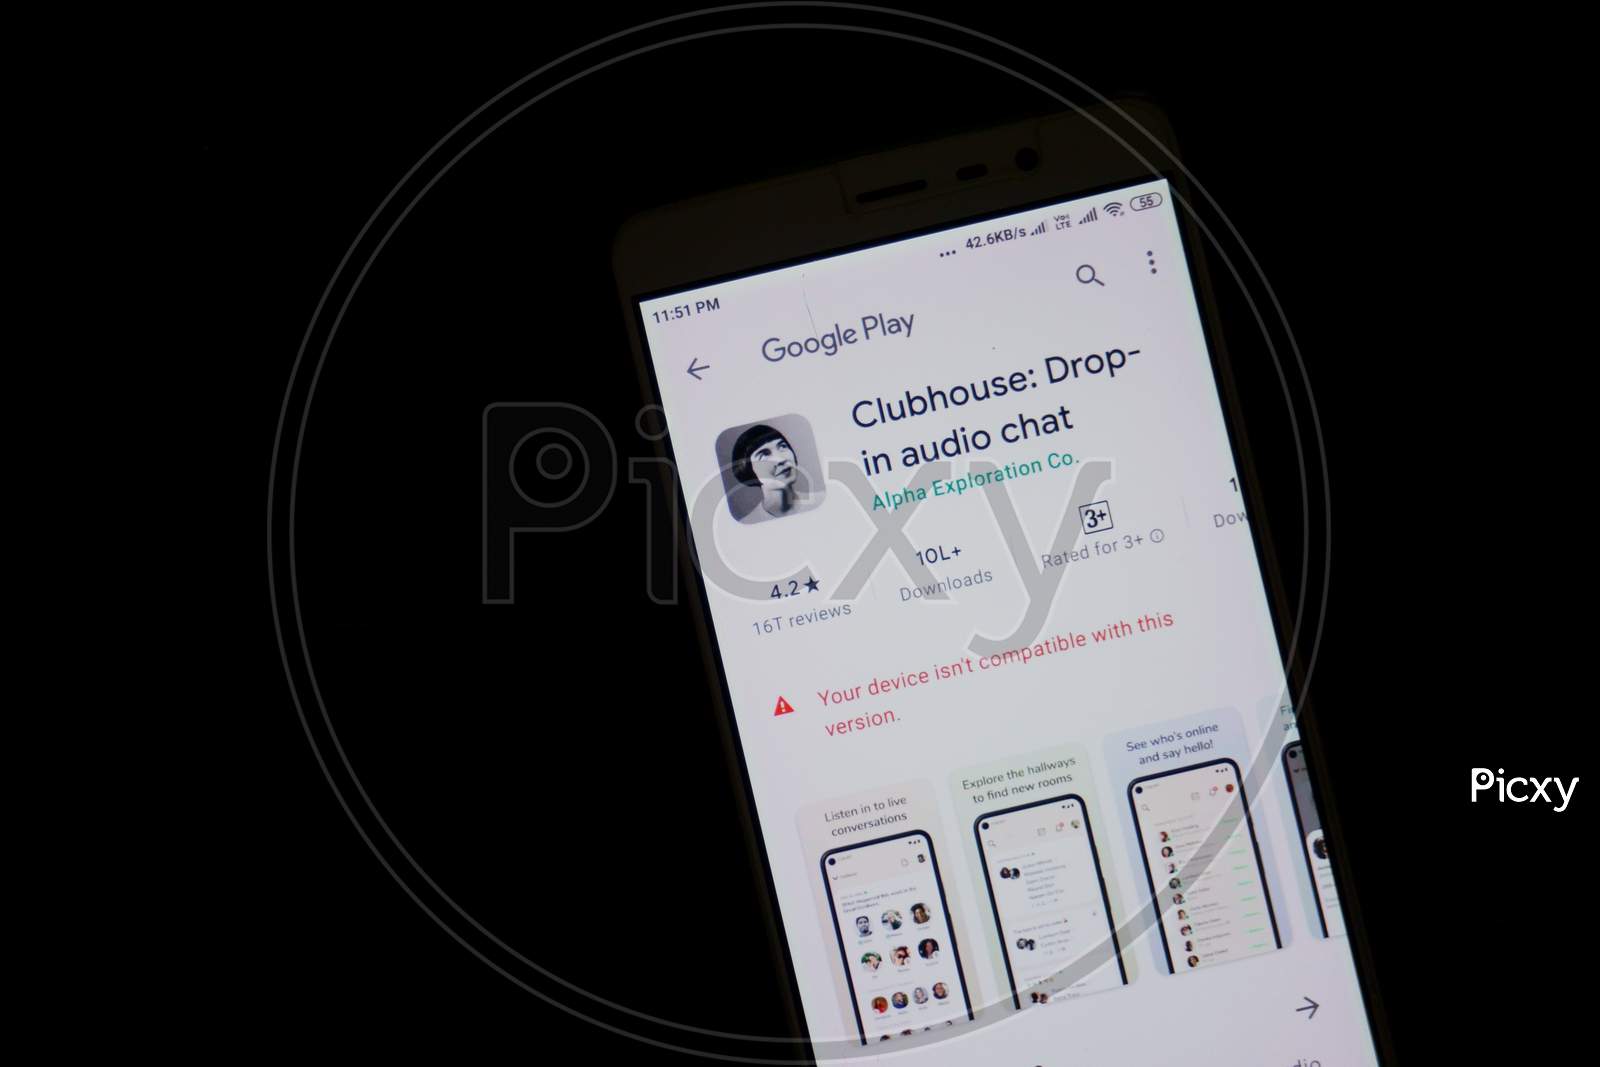 Kerala, India - June 02, 2021: Drop-In Audio Chat App Clubhouse Showing Incompatible With Android Version In Google Play Store On A Smartphone.